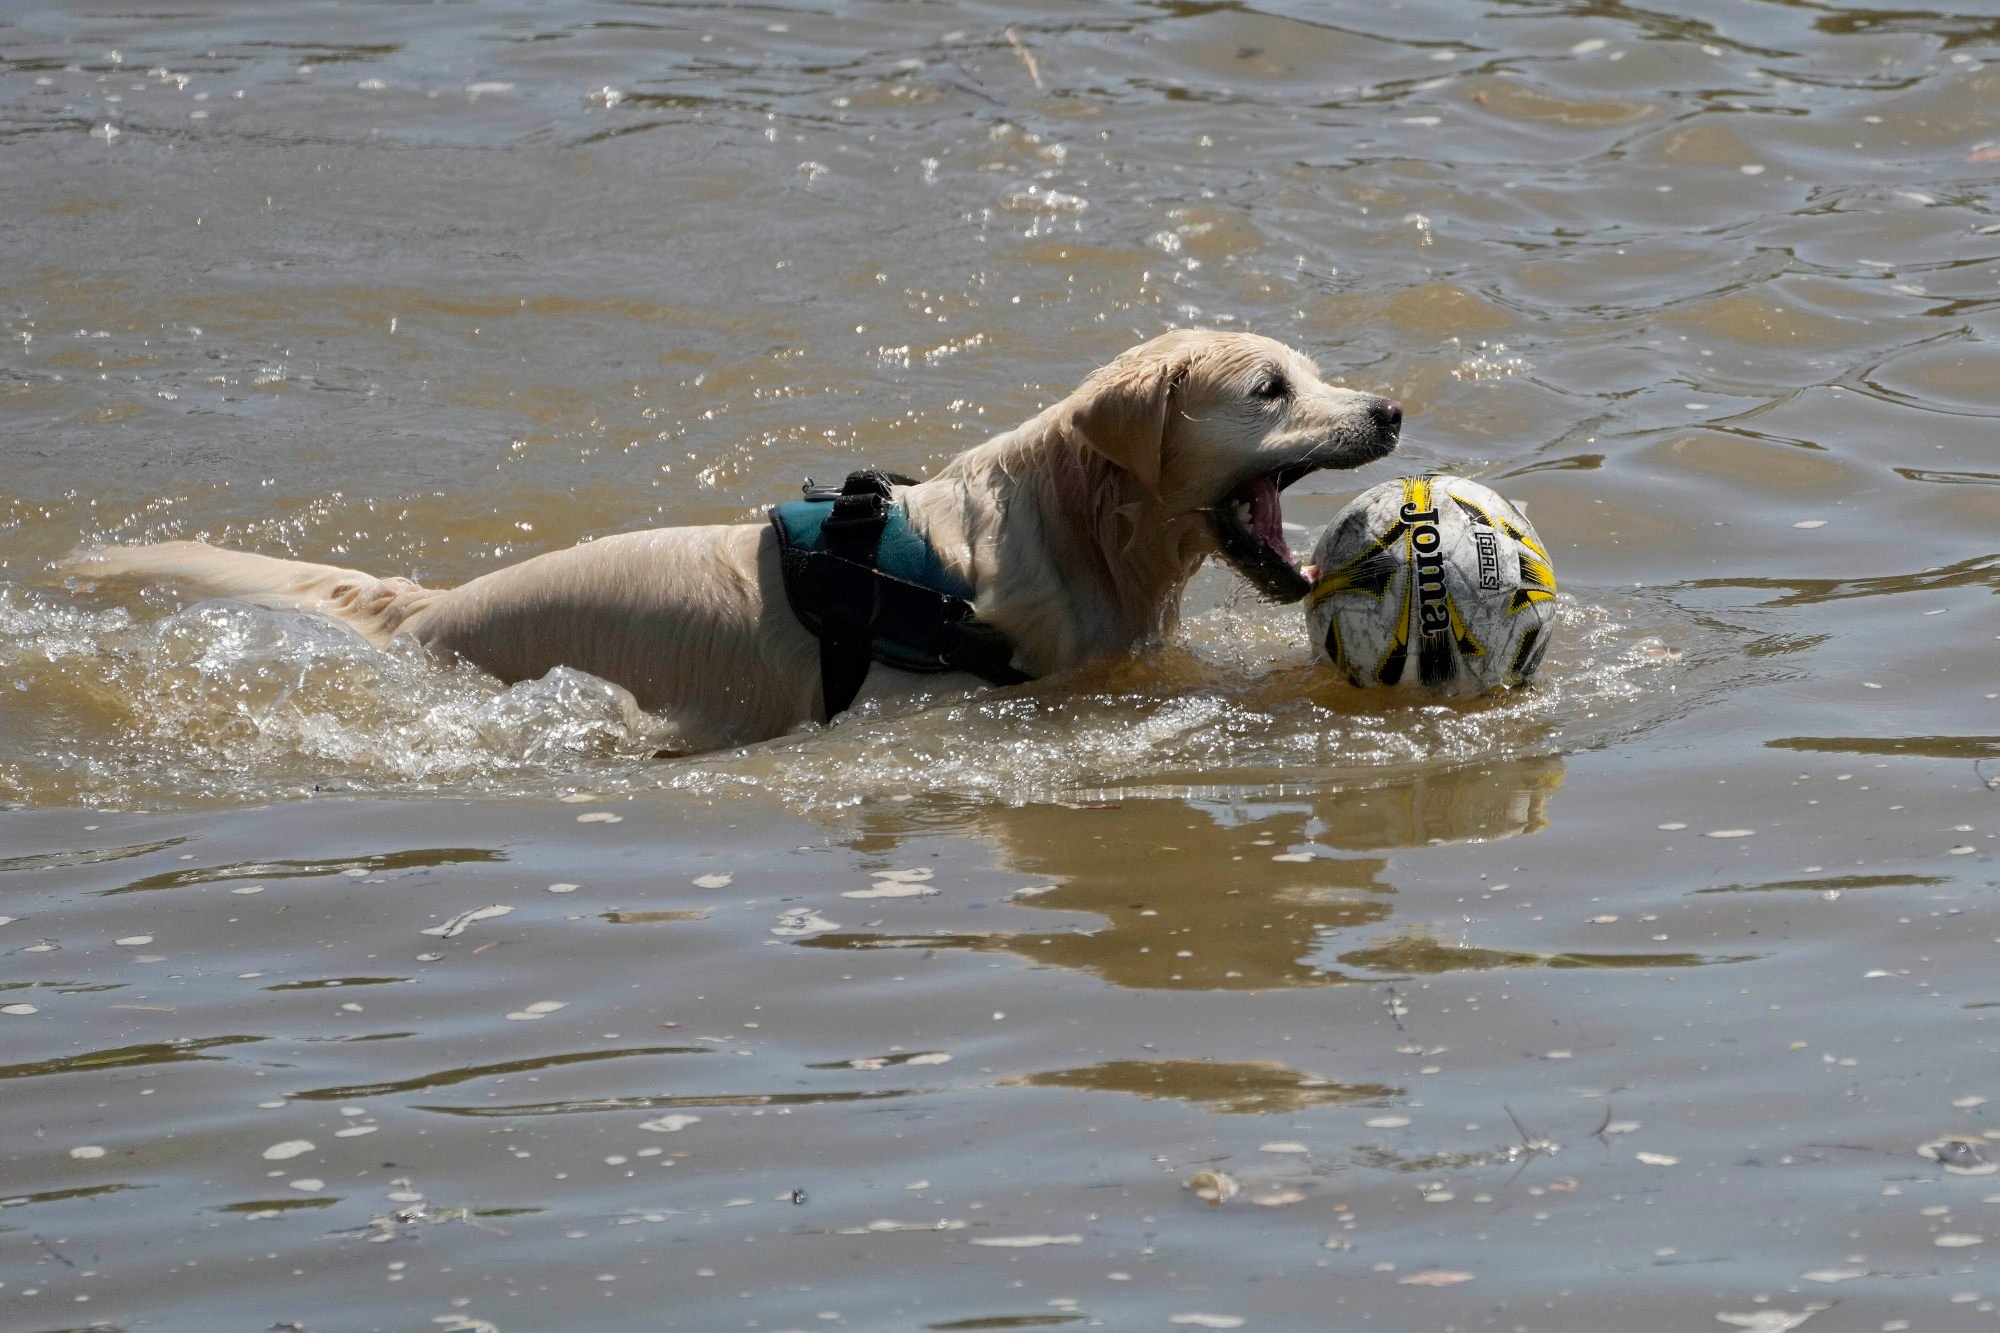 A dog plays with its football in the river Thames during sunny weather in London on Friday. Photo: AP